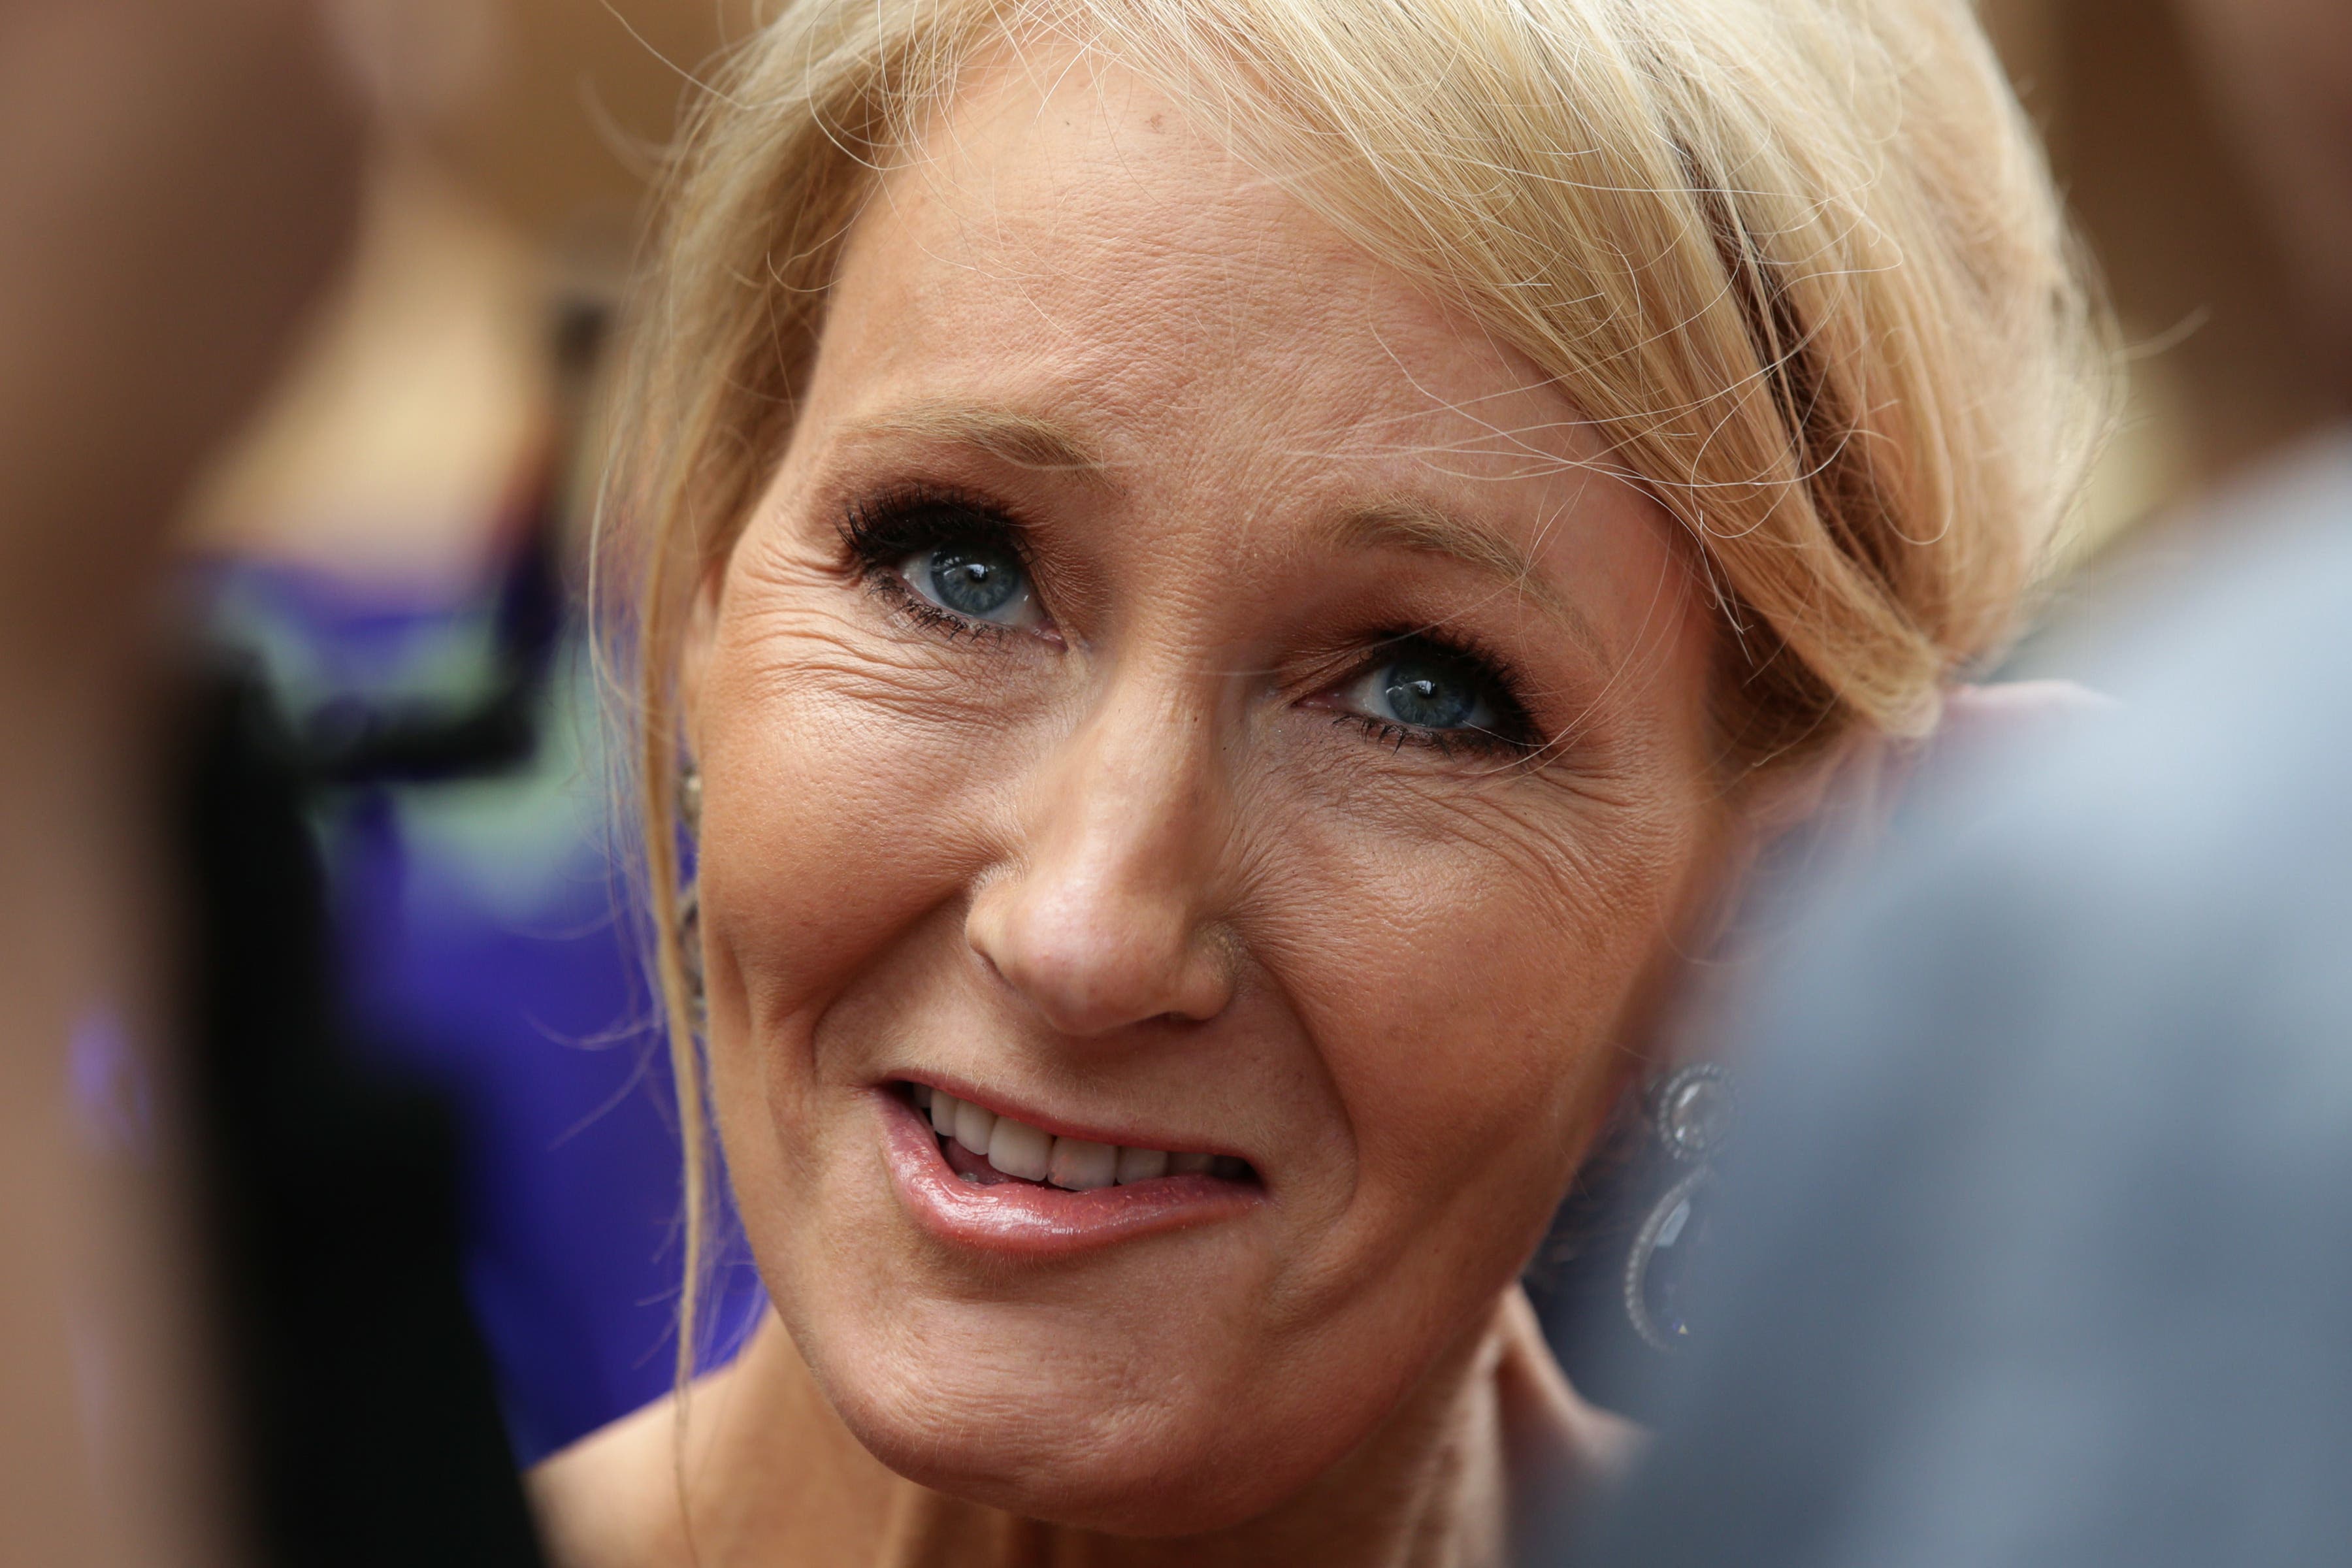 JK Rowling posted a criticism of trans women being allowed into women’s changing rooms